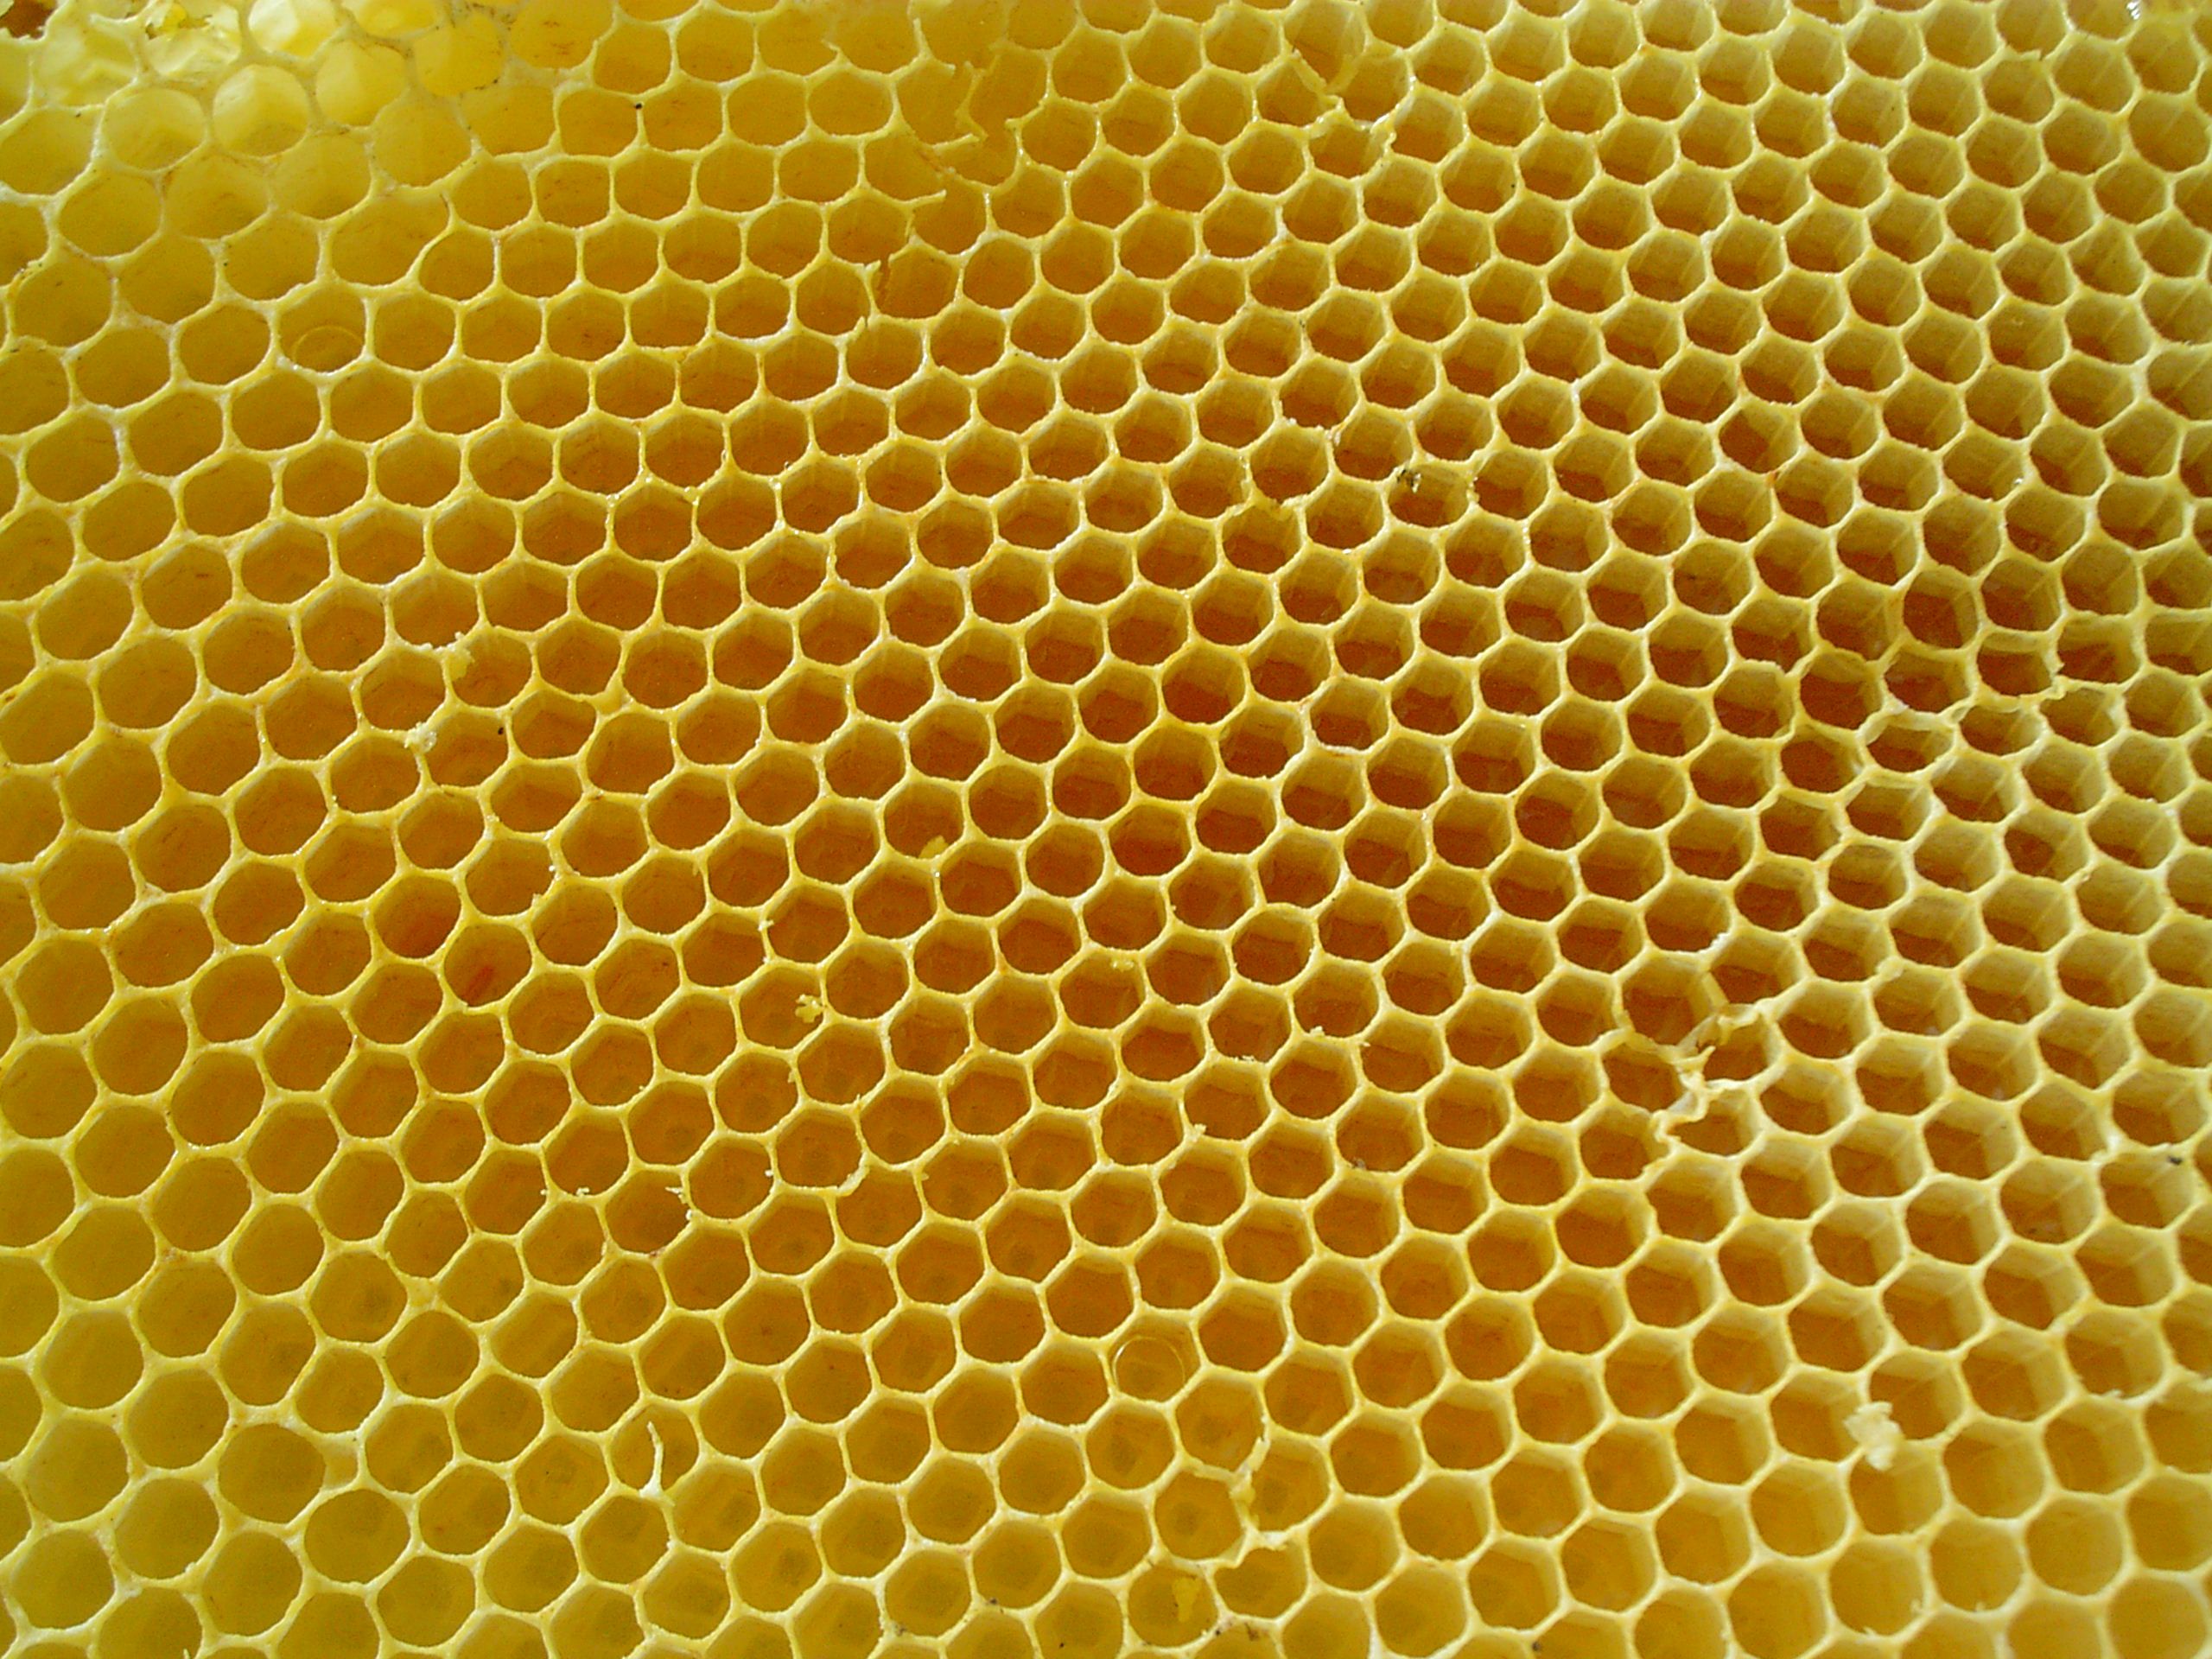 Honey combs. Patterns in nature. | Honey comb patterns | Pinterest ...